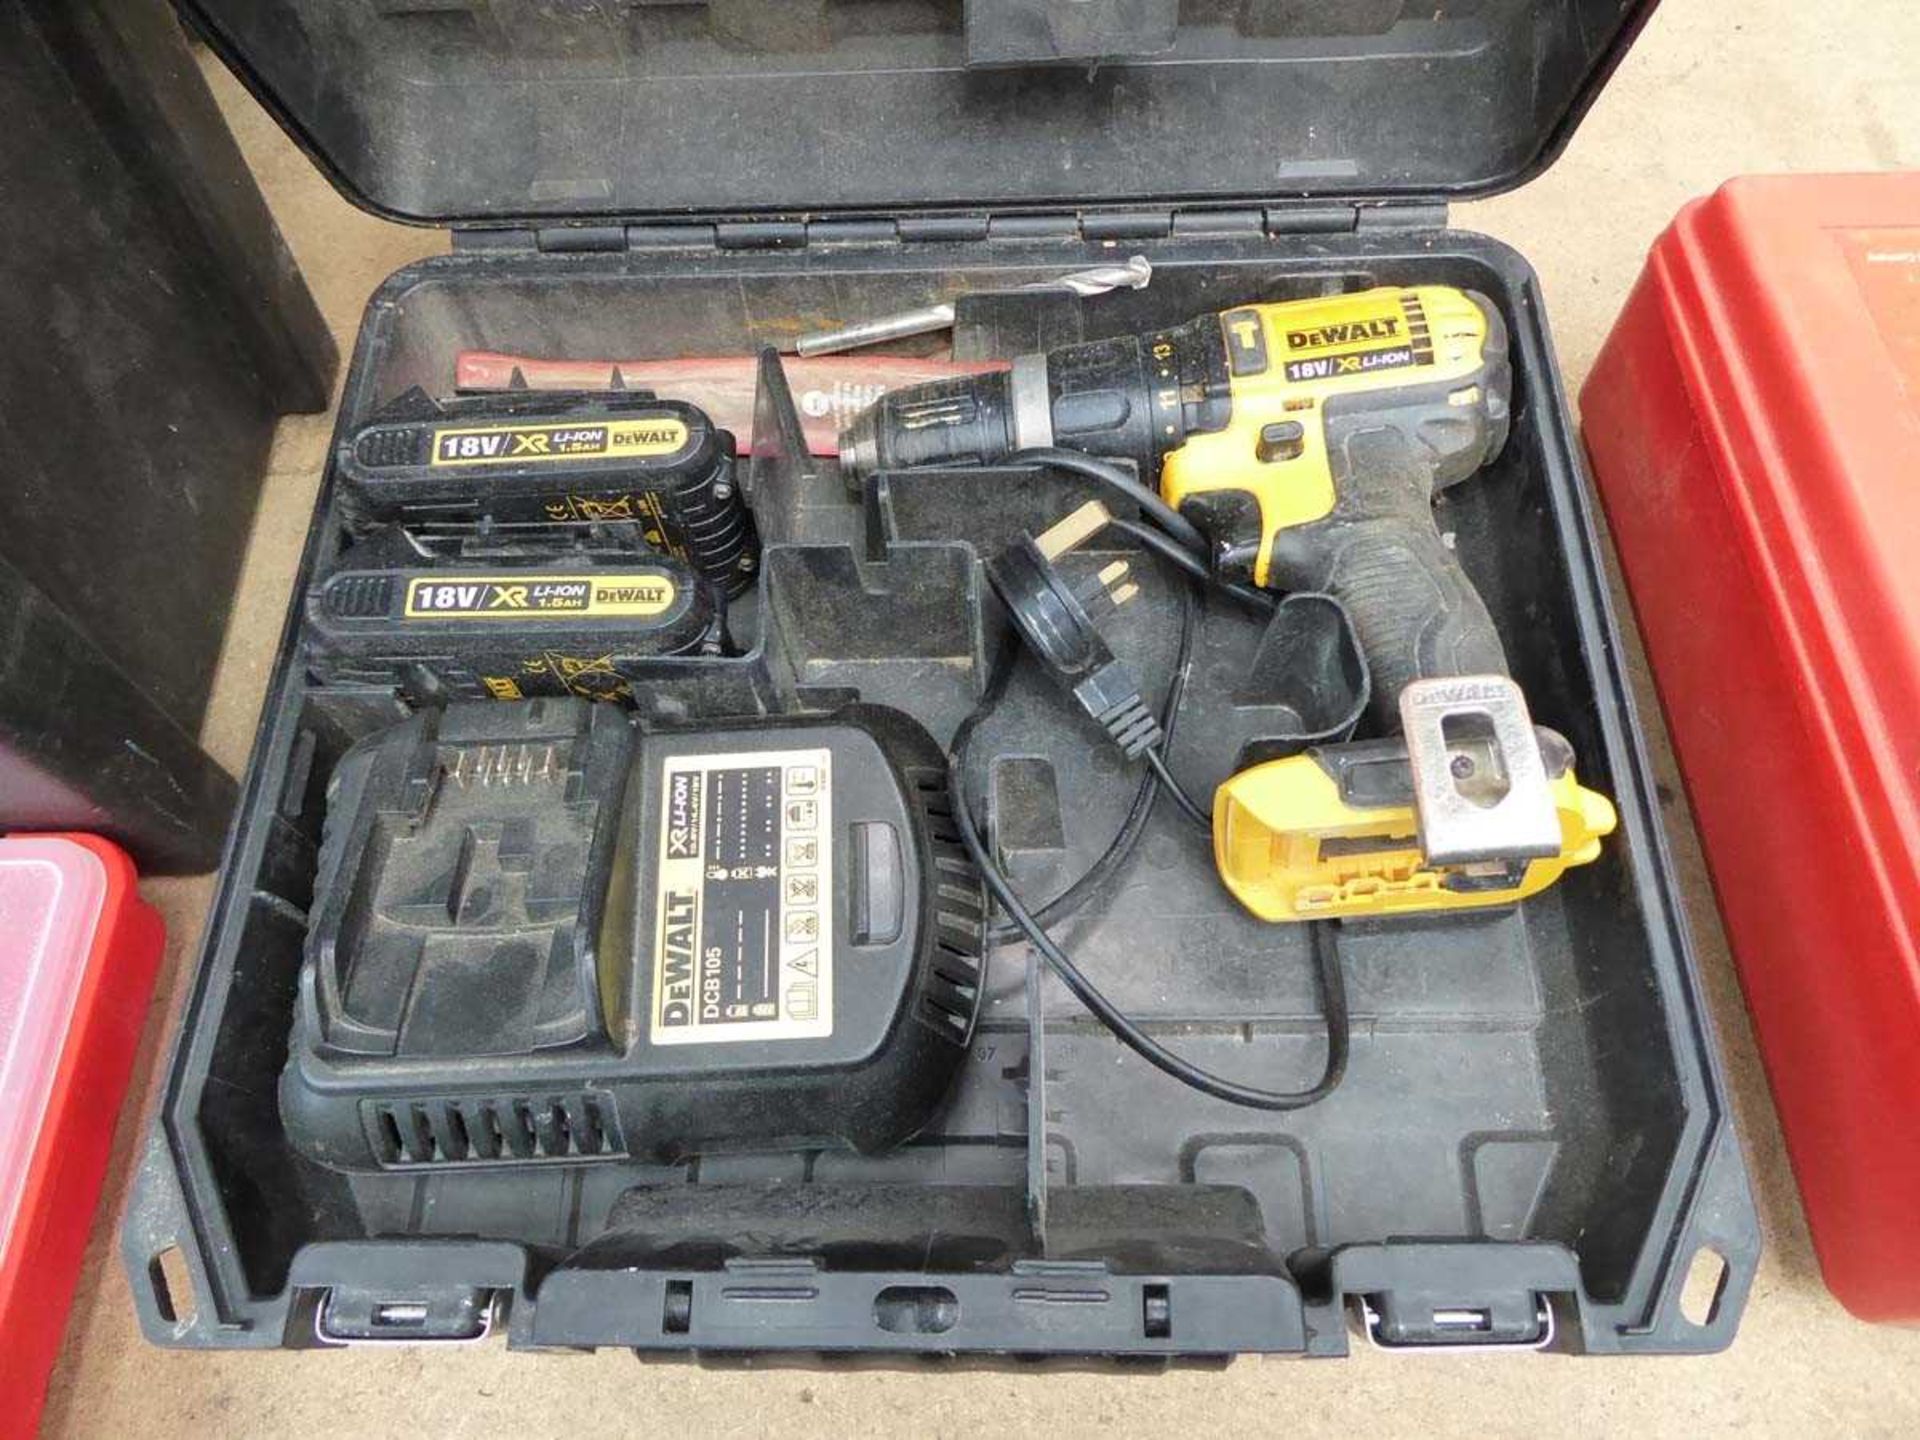 DeWalt battery drill with 2 batteries and charger